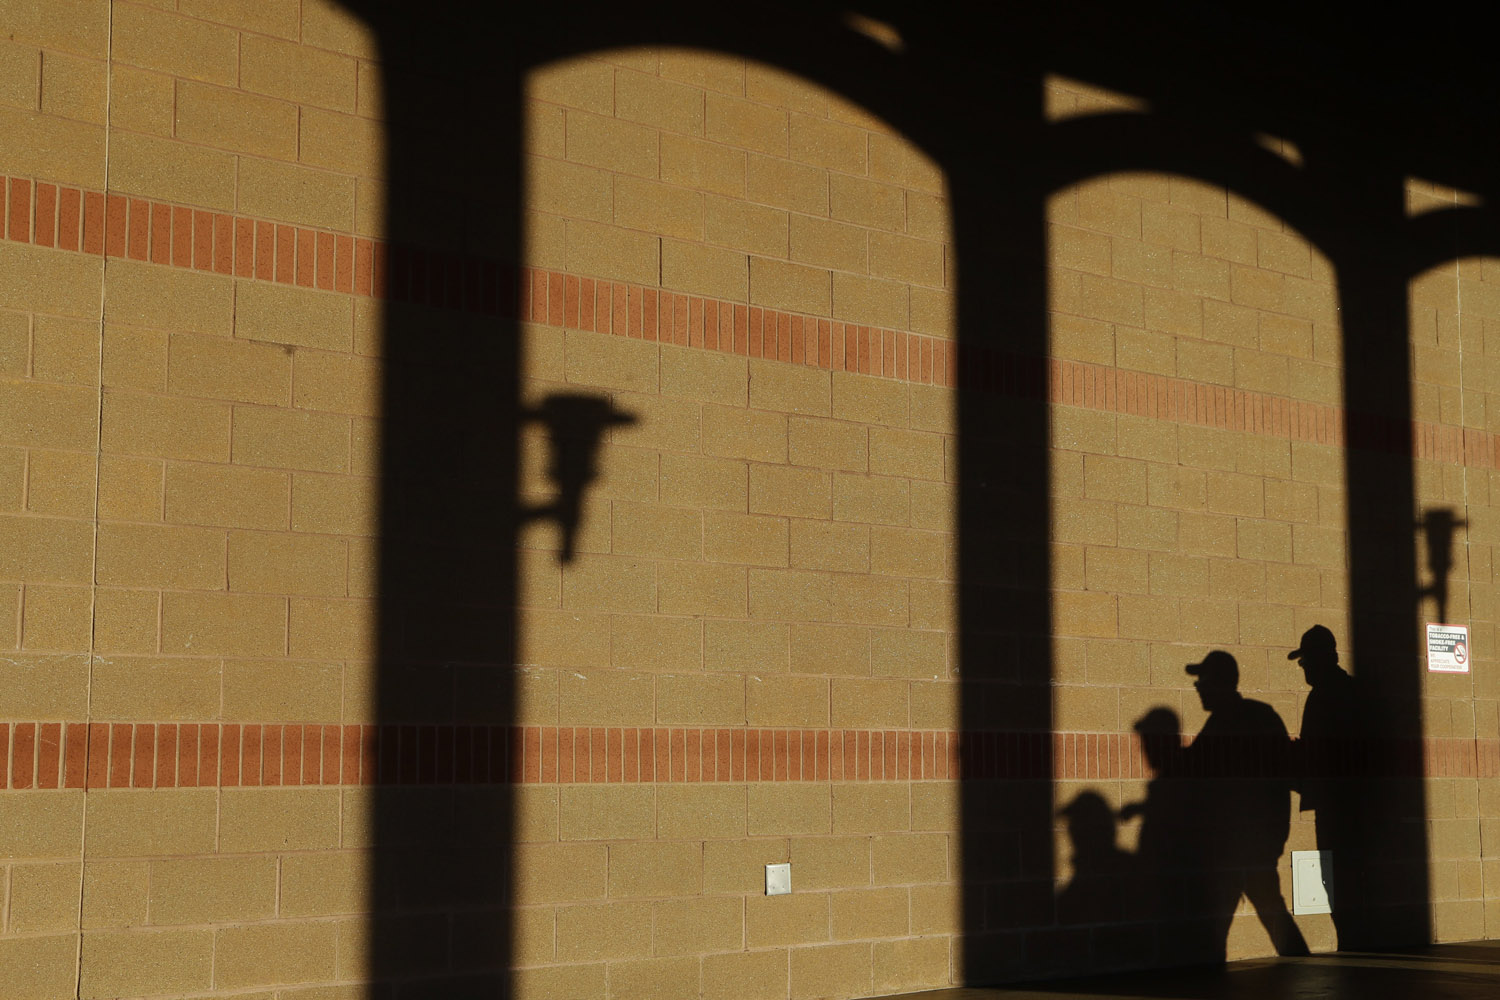 Oct. 27, 2013. Baseball fans are silhouetted outside of Busch Stadium before Stadium  Game 4 of baseball's World Series between the St. Louis Cardinals and the Boston Red Sox.